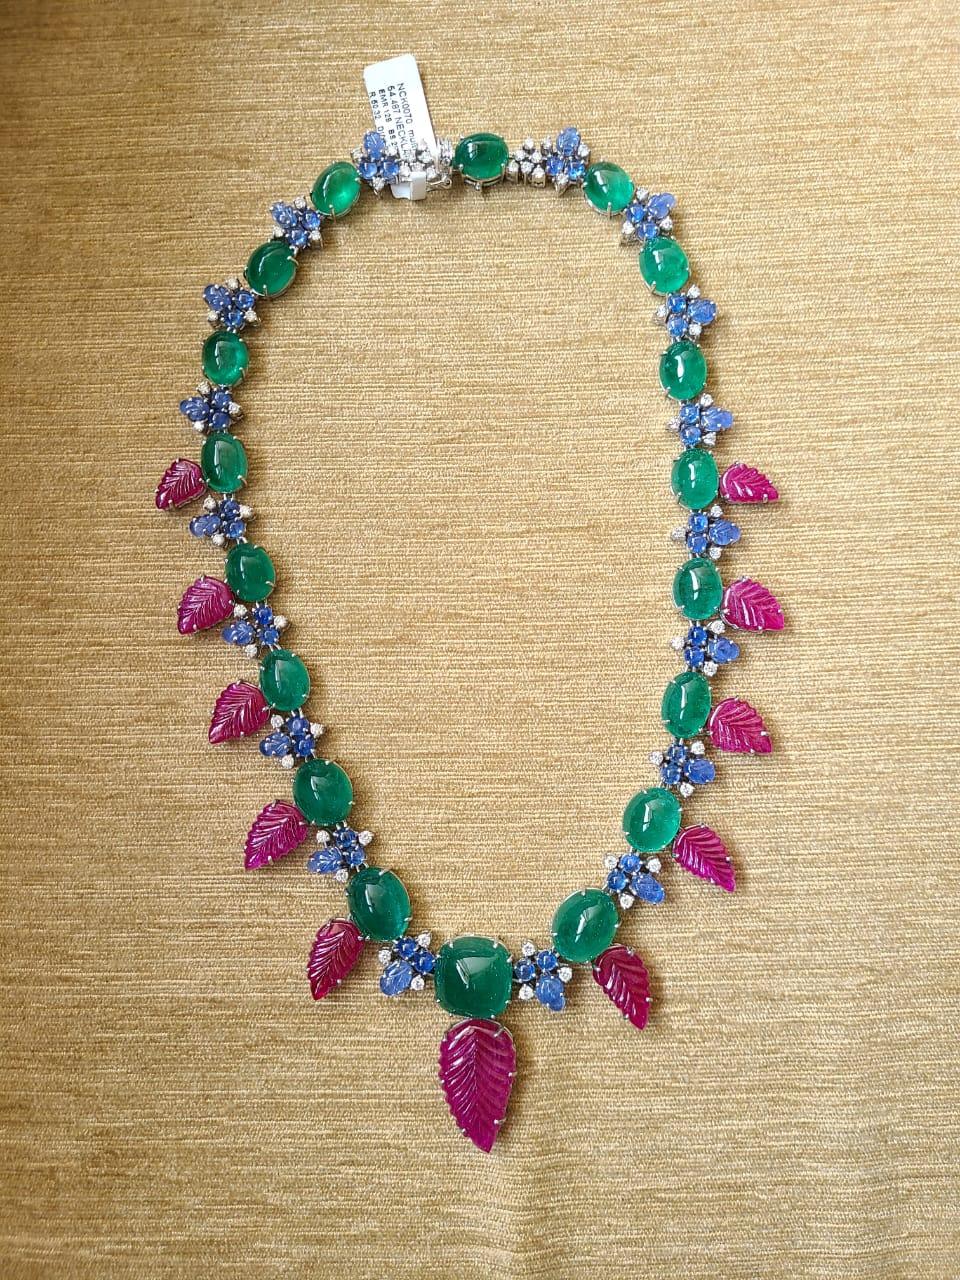 A very gorgeous and one of a kind, Emerald, Blue Sapphire & Ruby Tutti Frutti Necklace set in 18K Gold & Diamonds. The weight of the Emerald Cabochons is 128 carats. The Emeralds are of Zambian origin. The weight of the carved Rubies are 50.32